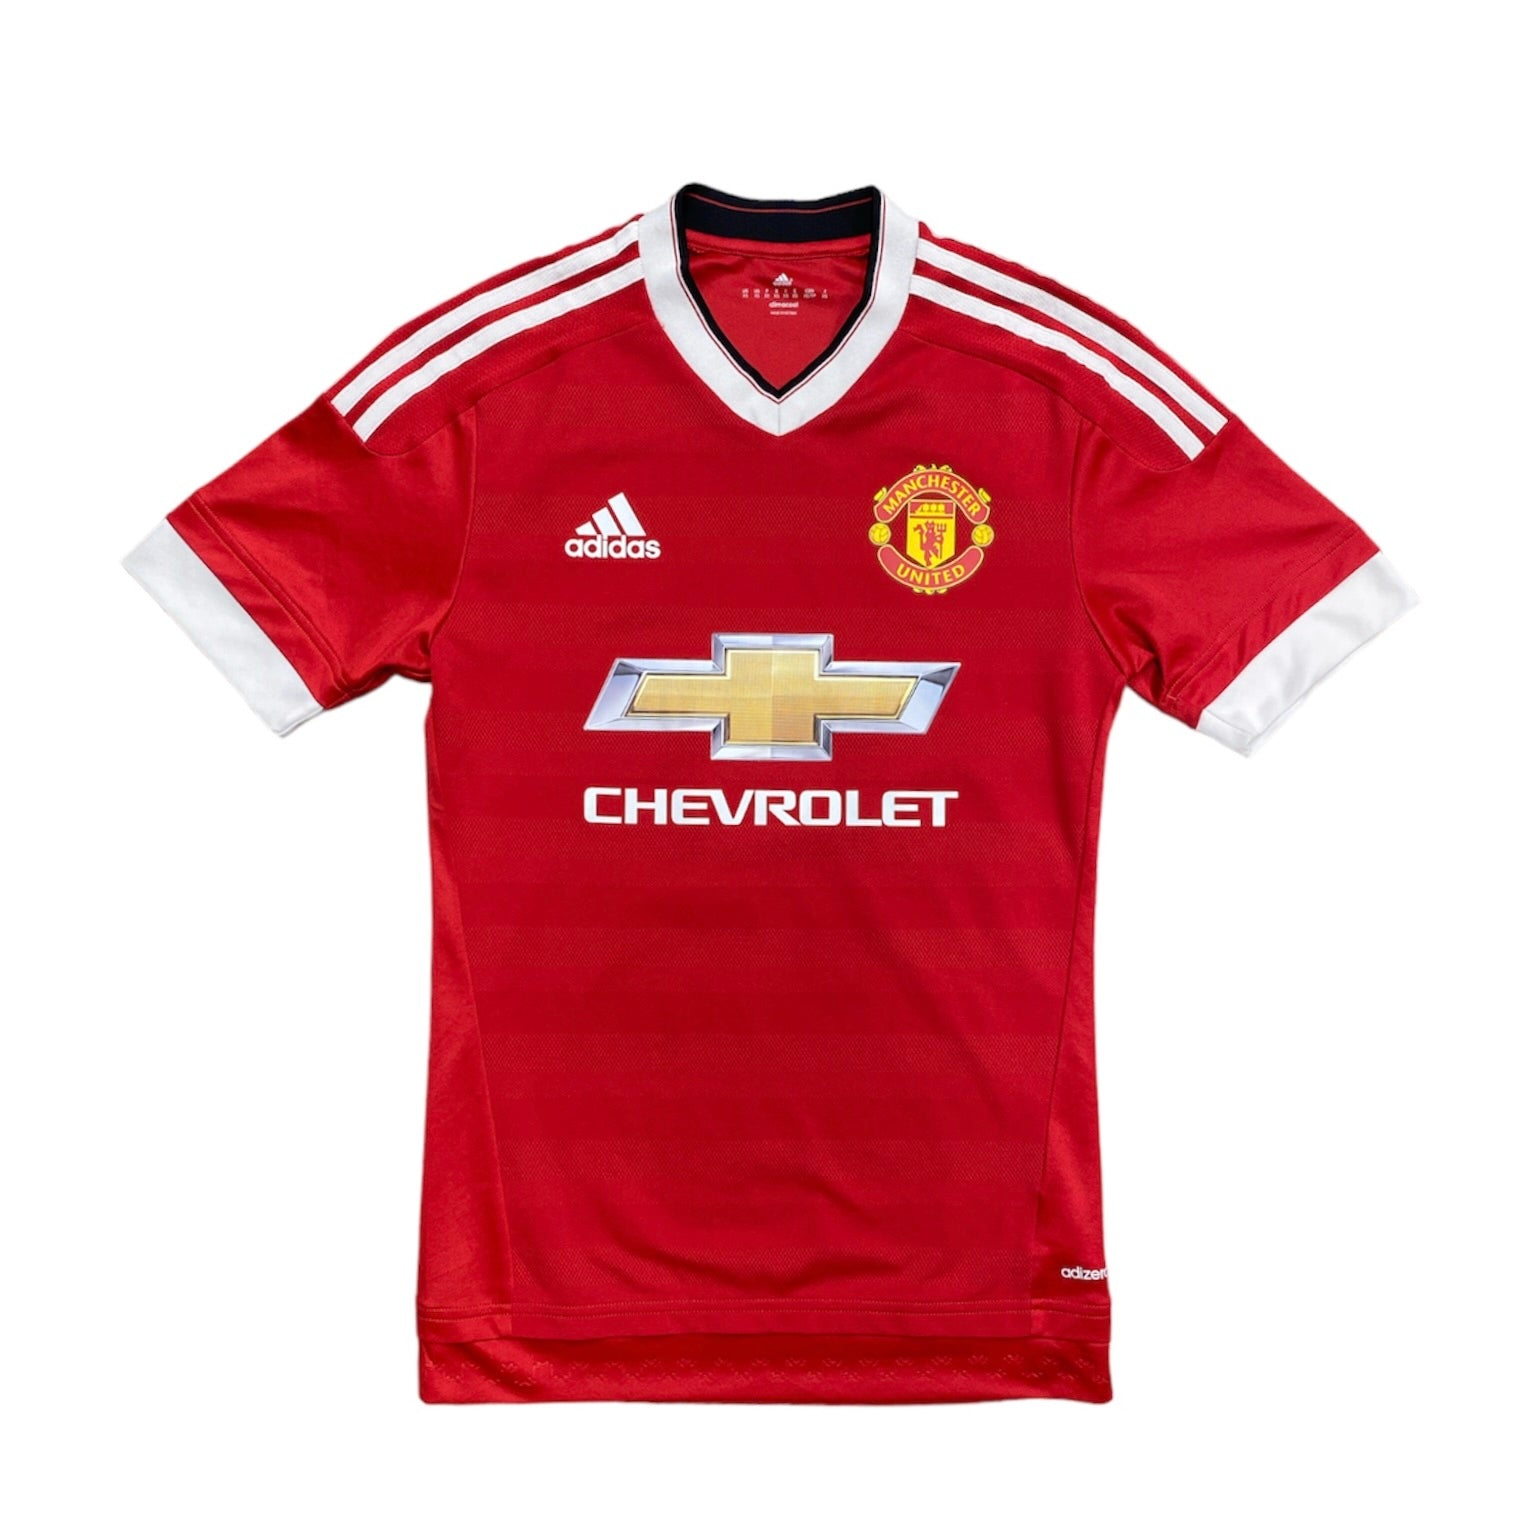 Adidas Manchester United 2015/2016 Home Football Jersey